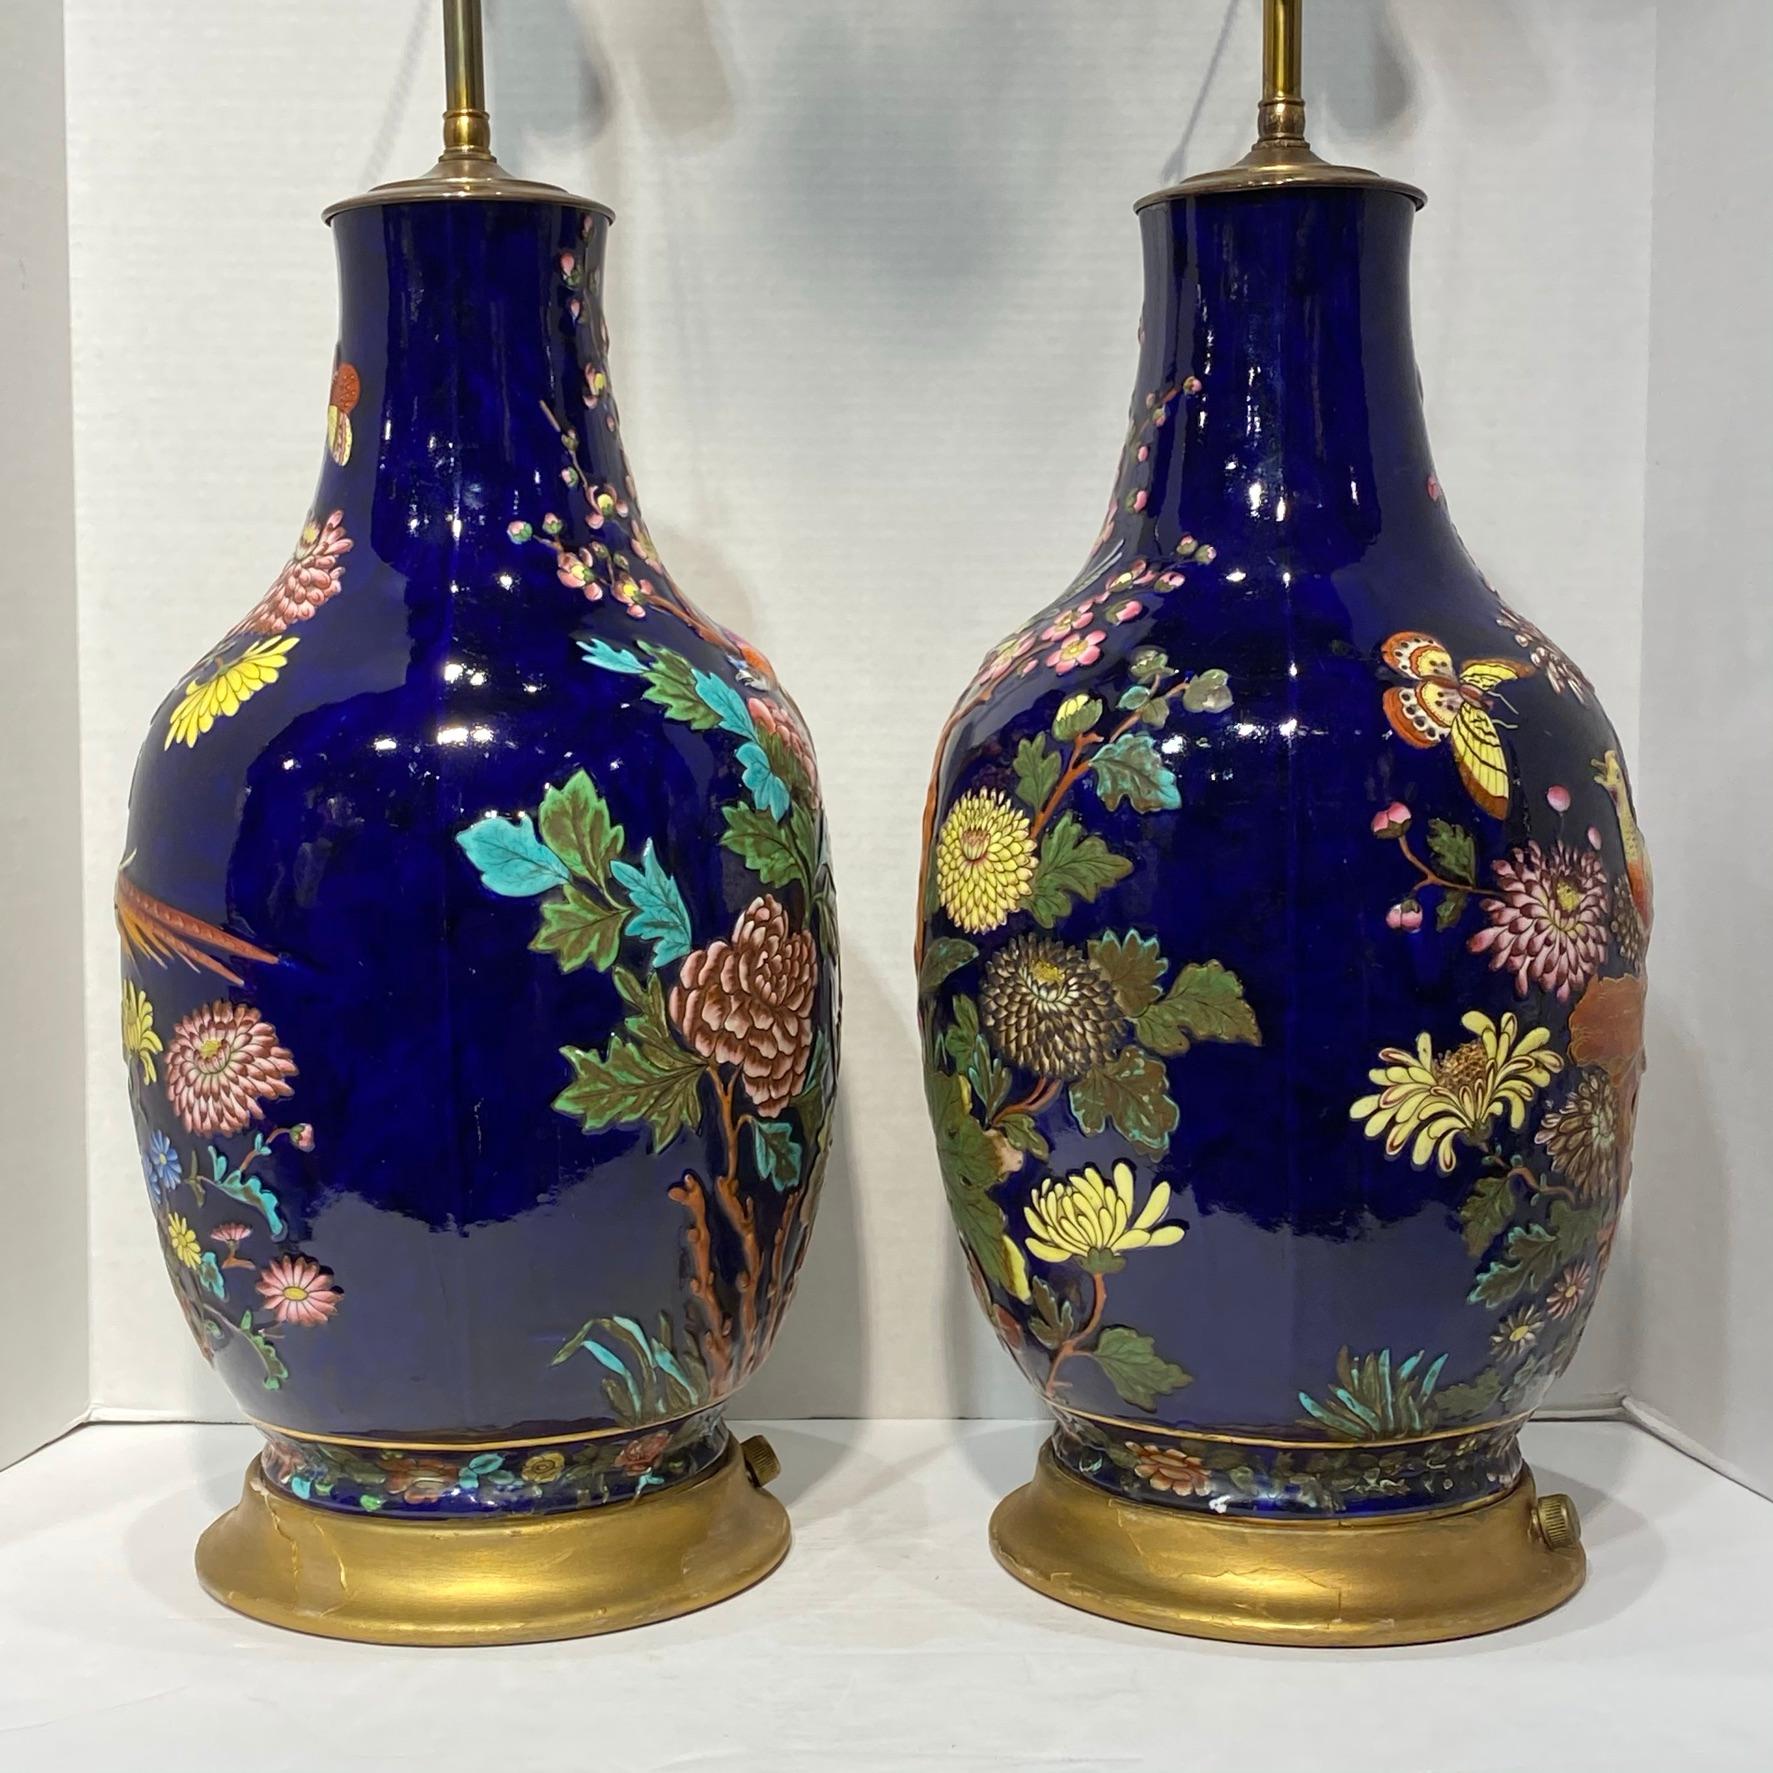 19th Century Pair Colorful Enameled Porcelain Table Lamps with Bird and Flowers Motifs For Sale